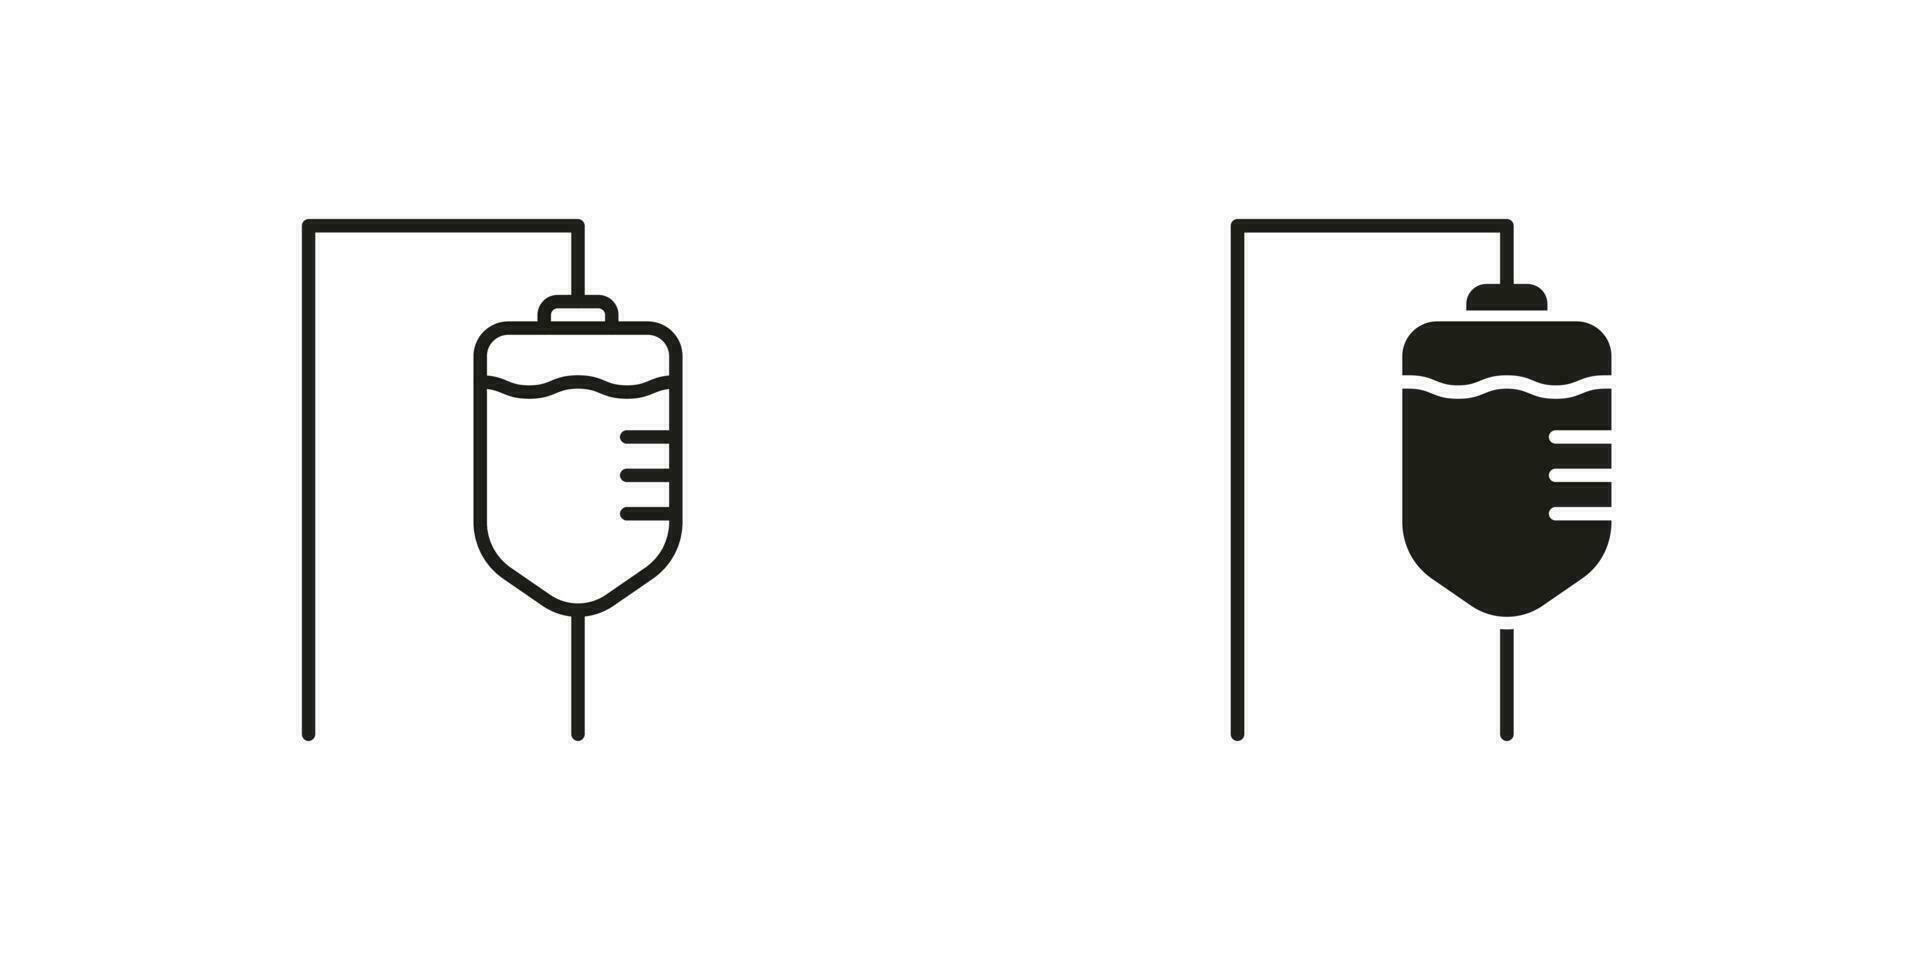 Iv Drip Line and Silhouette Black Icon Set. Infusion Medication Aid Symbol Collection. Infusion Medical Bag Pictogram. Medicine Treatment, Intravenous Injection Sign. Isolated Vector Illustration.